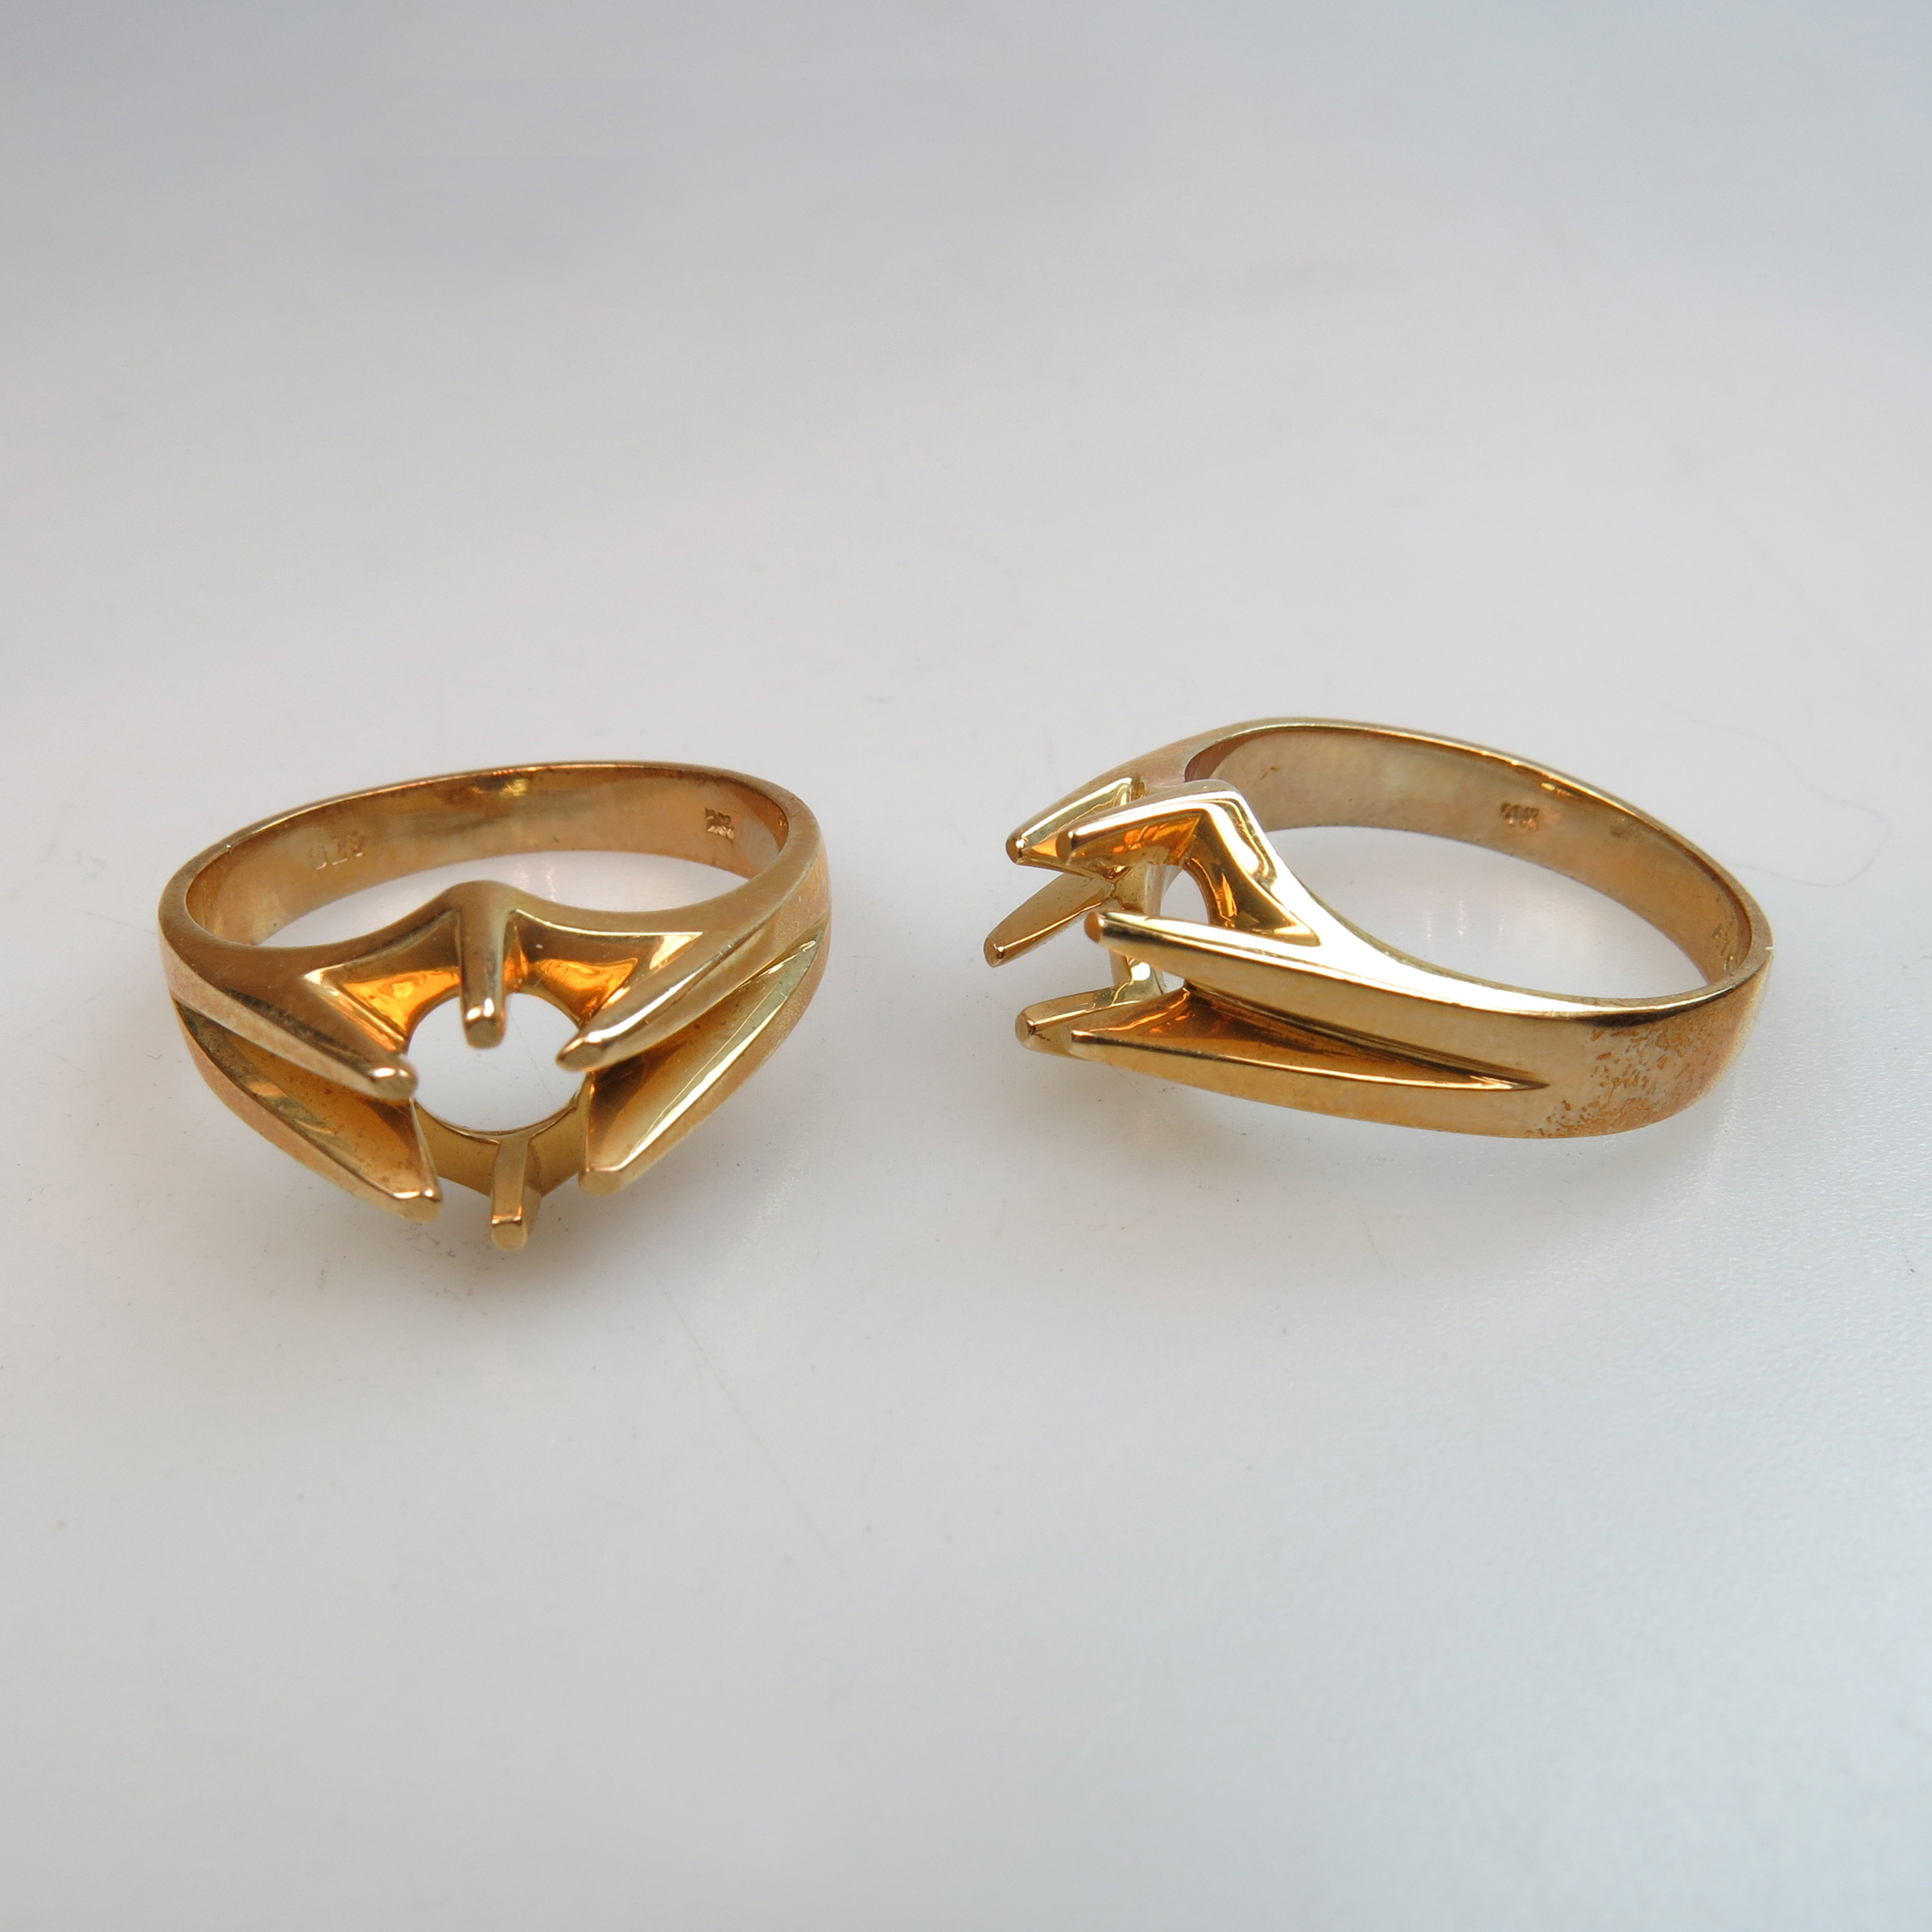 2 x 18K Yellow Gold 6 Claw Ring Mounts